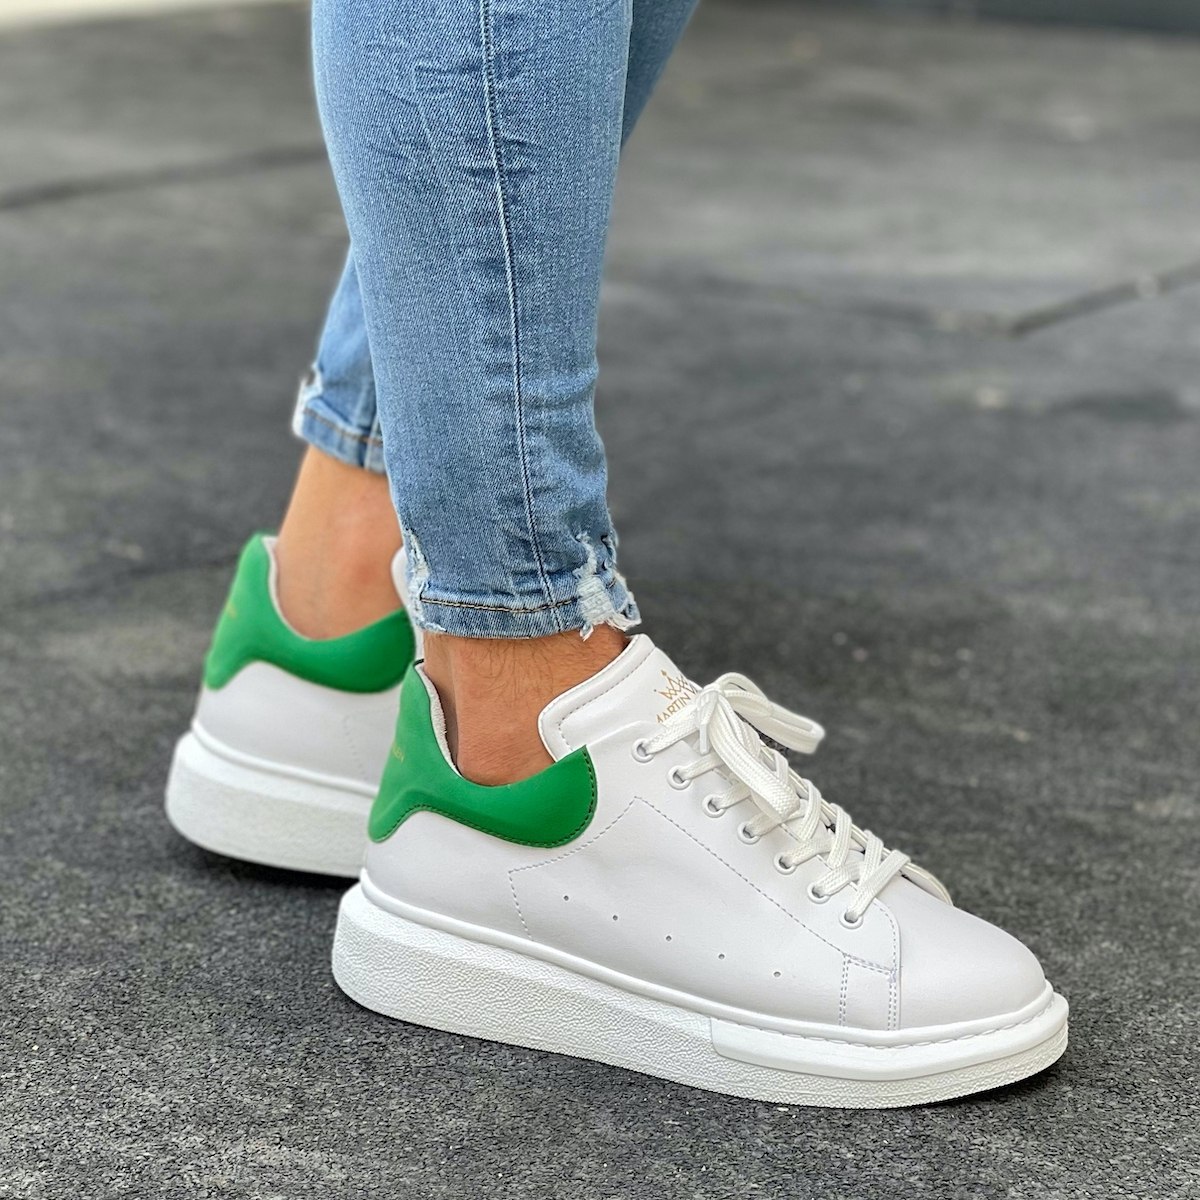 Men’s High Sole Sneakers Shoes White-Green